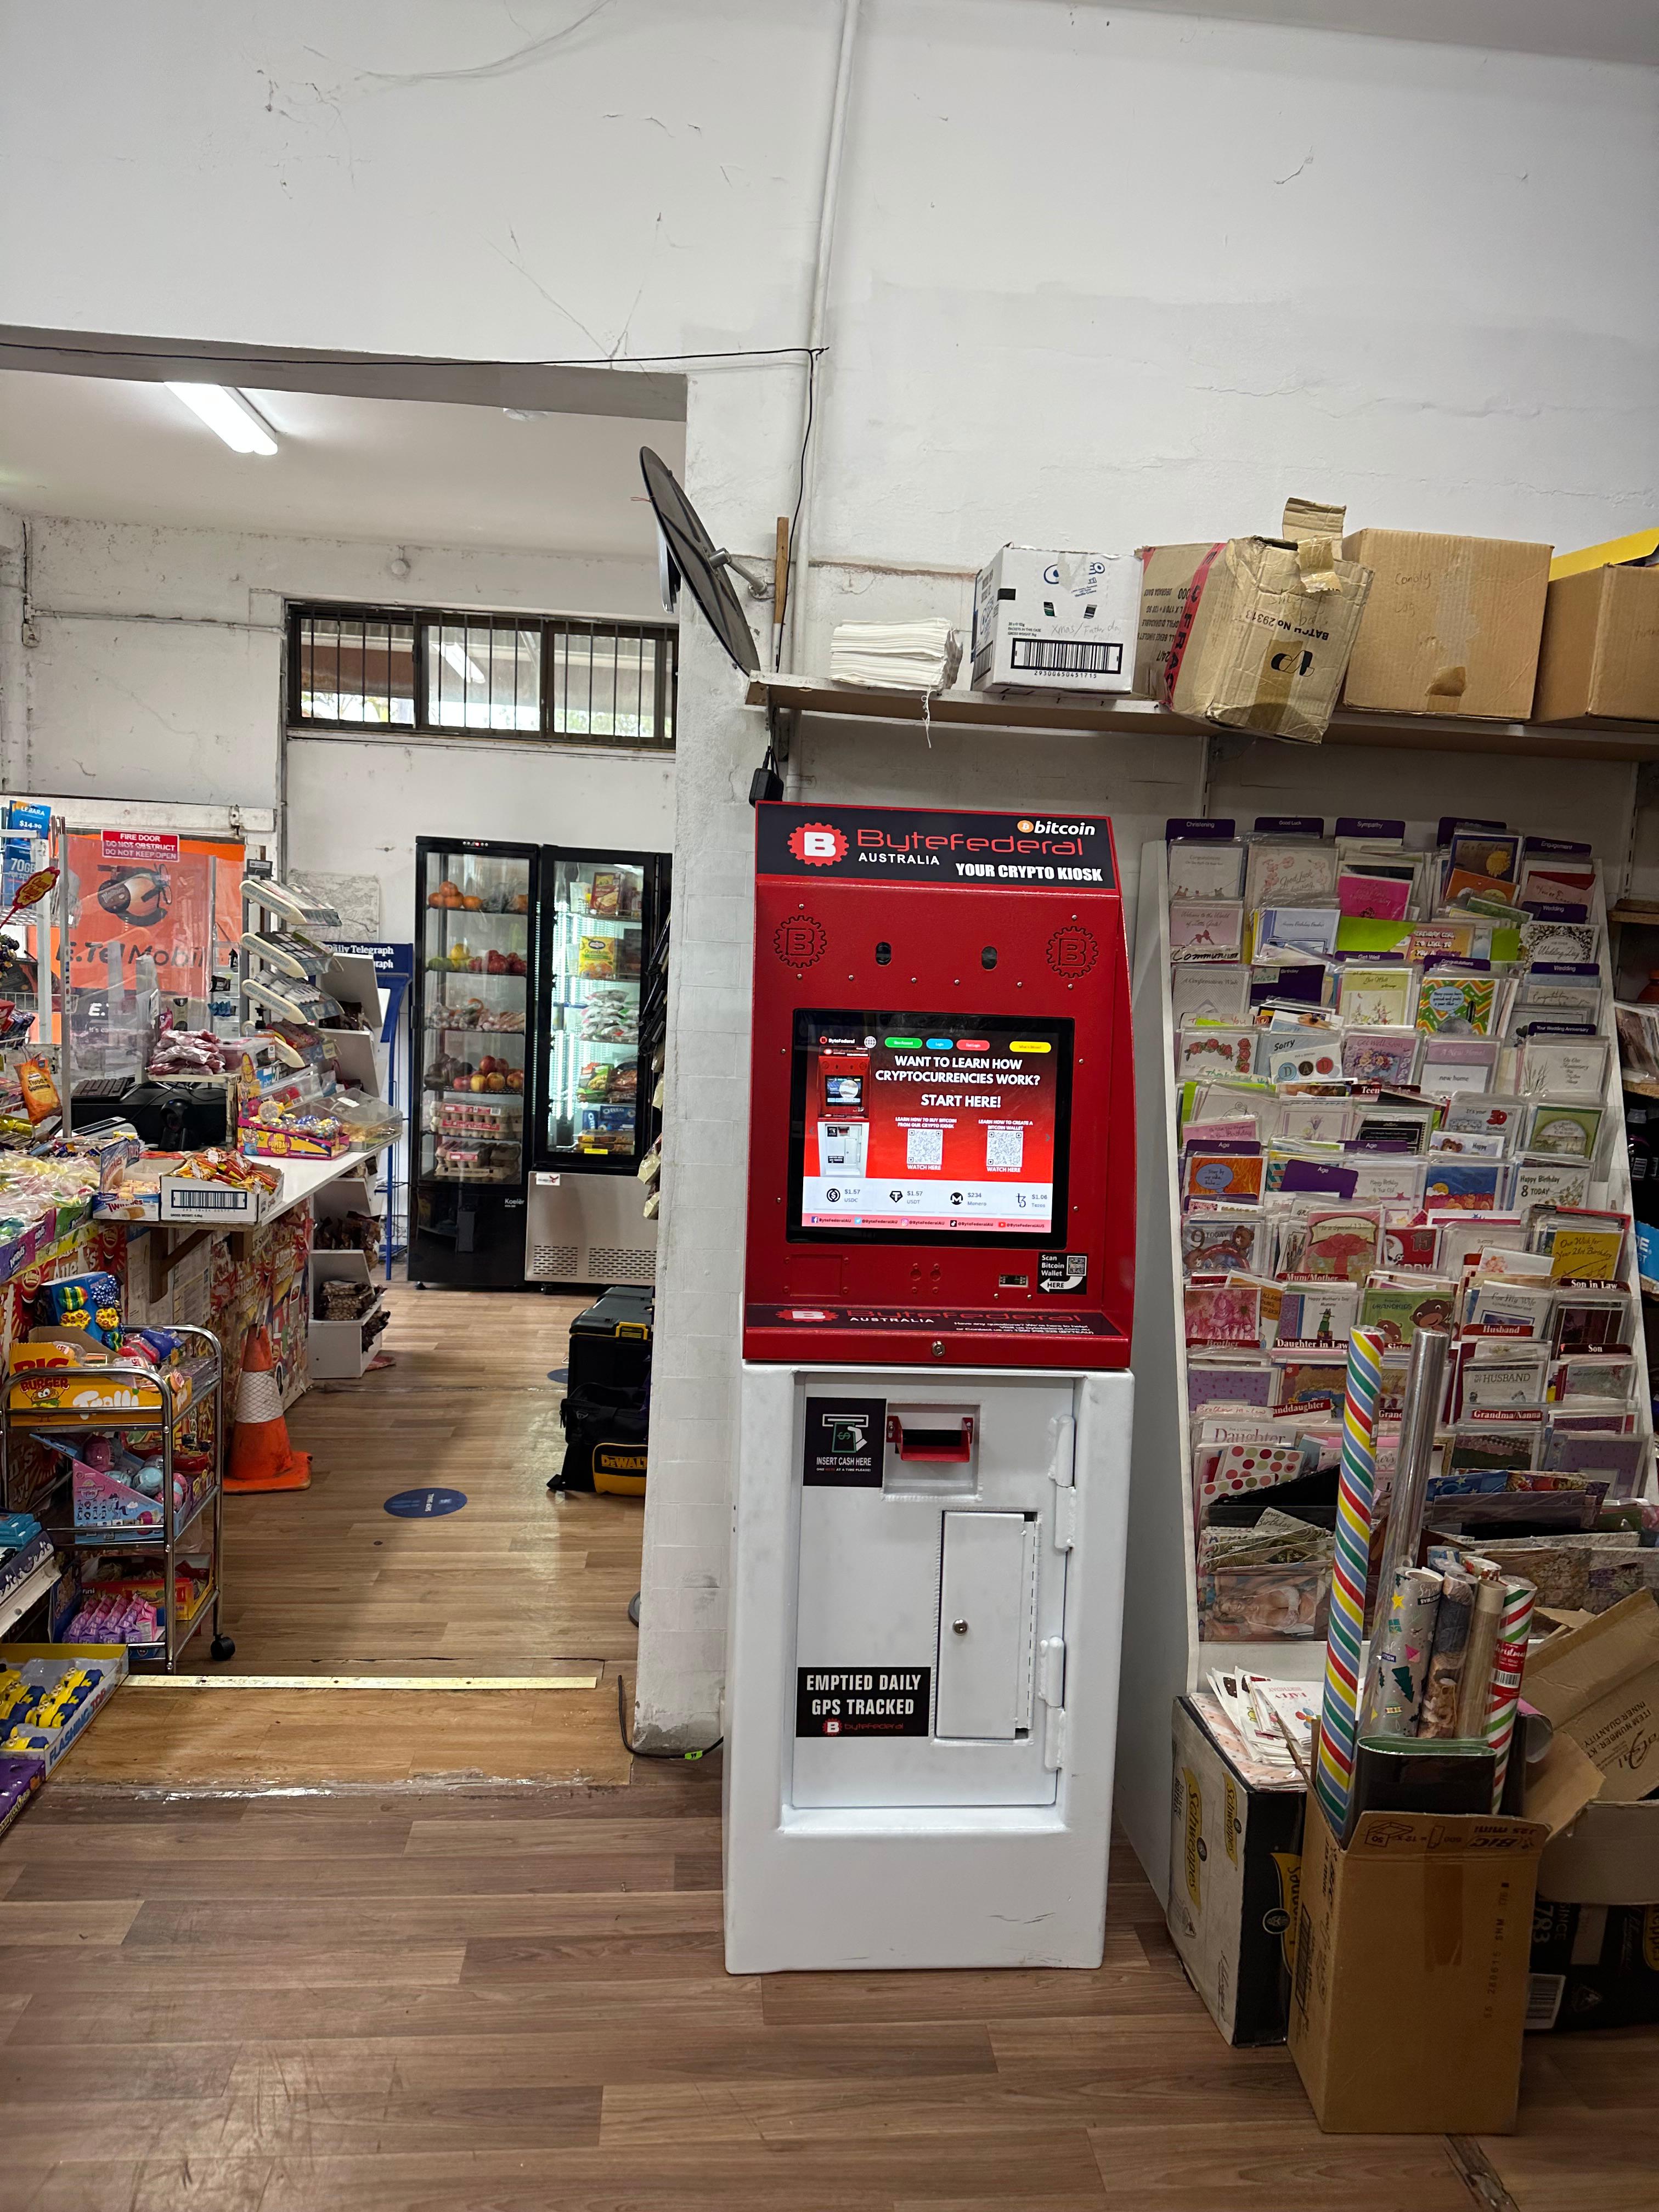 Images ByteFederal Australia Bitcoin ATM (G & M Convenience Store)